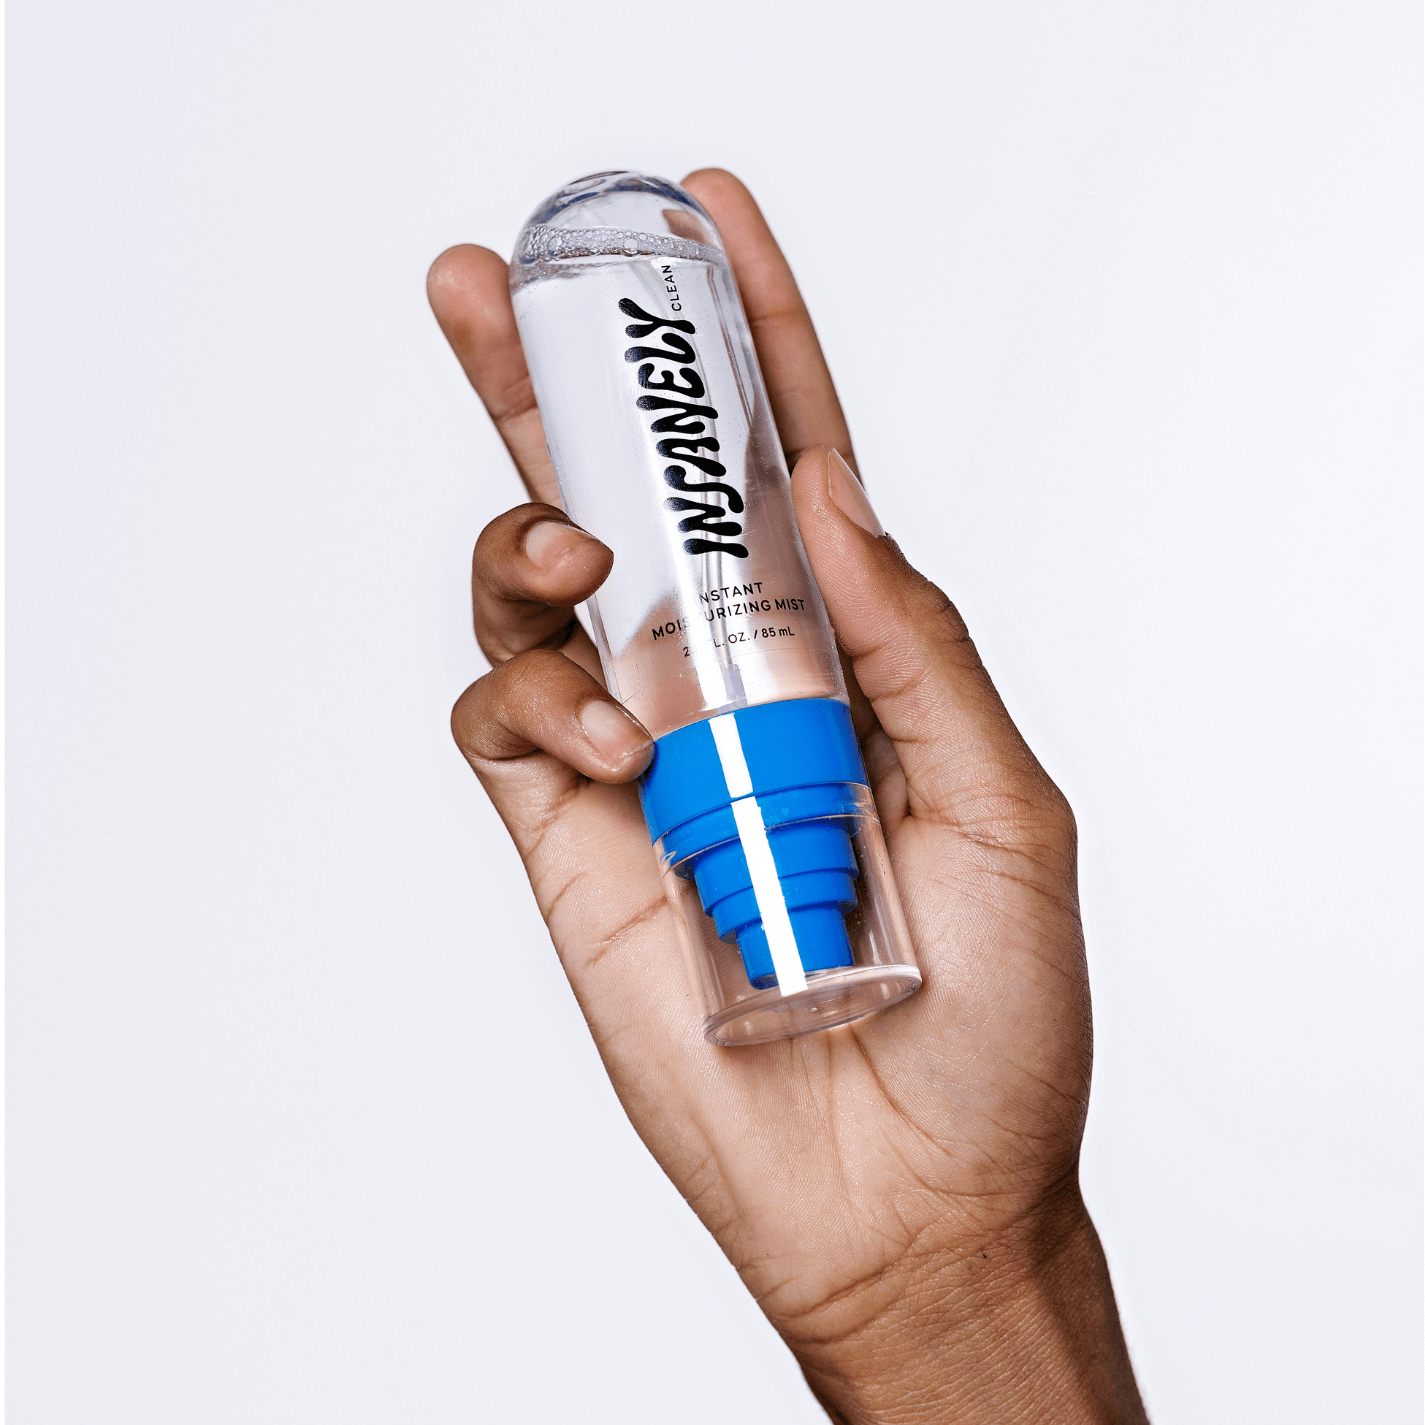 The most minimal men's facial hydrating mist being held up by a man's hand.